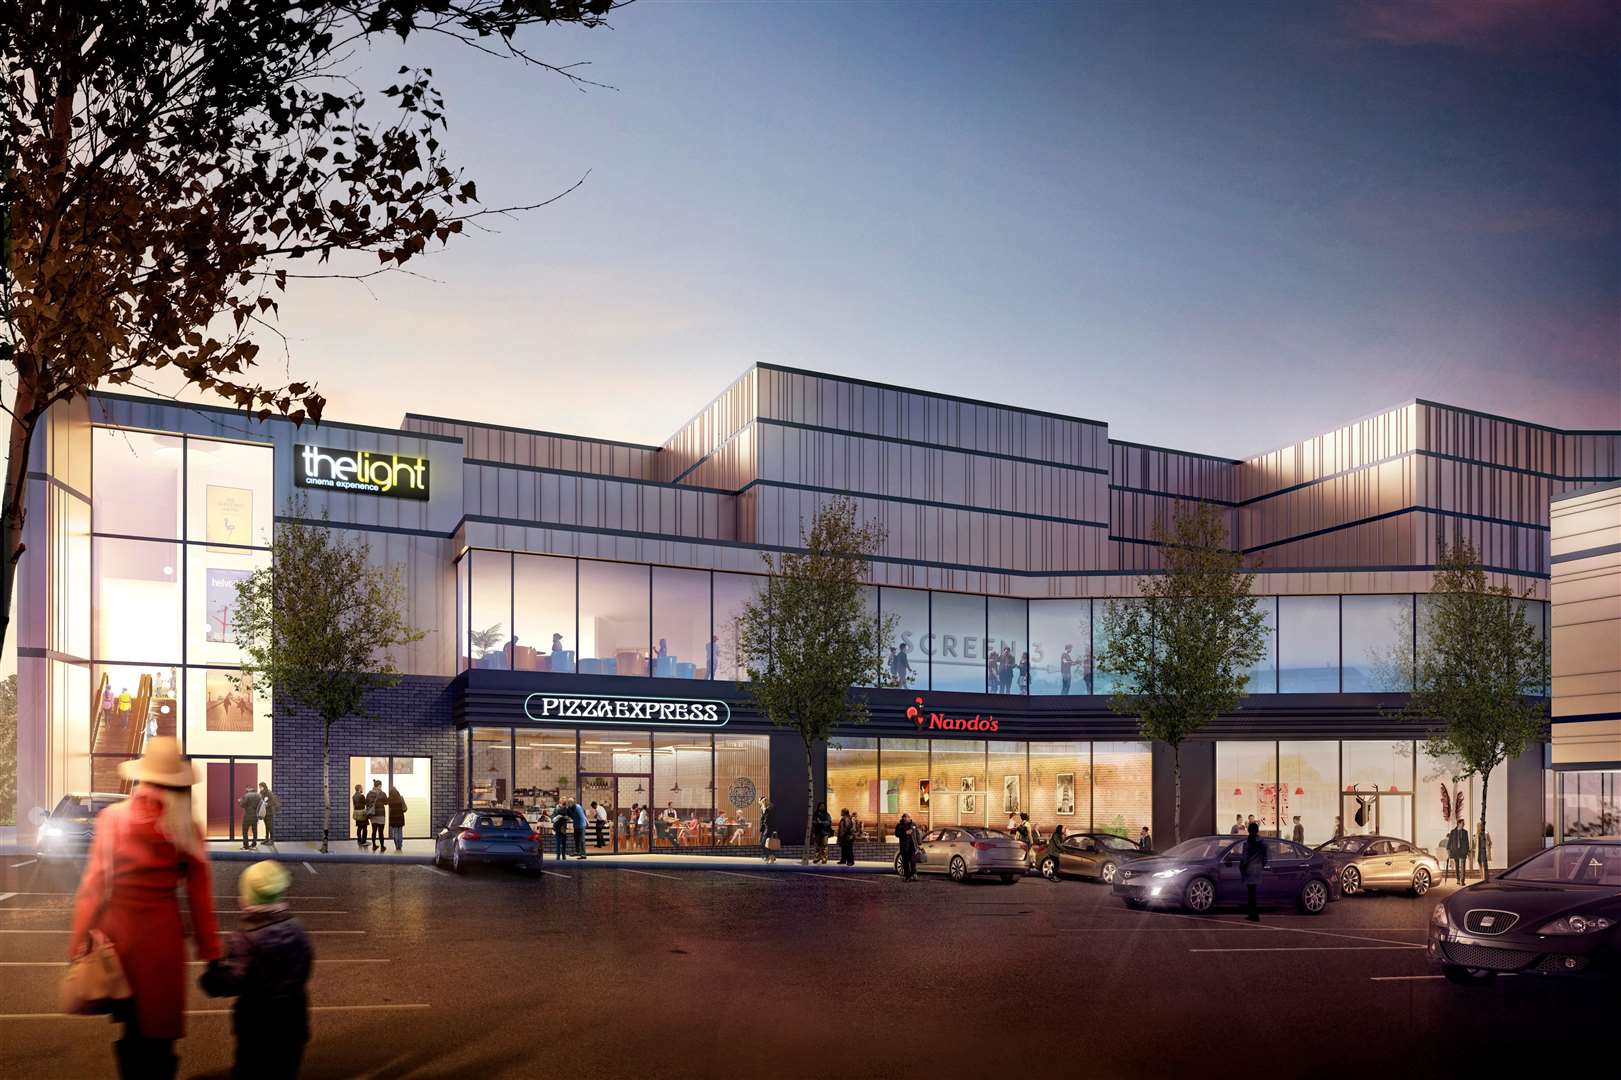 An artist's impression of Nando's and Pizza Express on the new leisure quarter in Sittingbourne